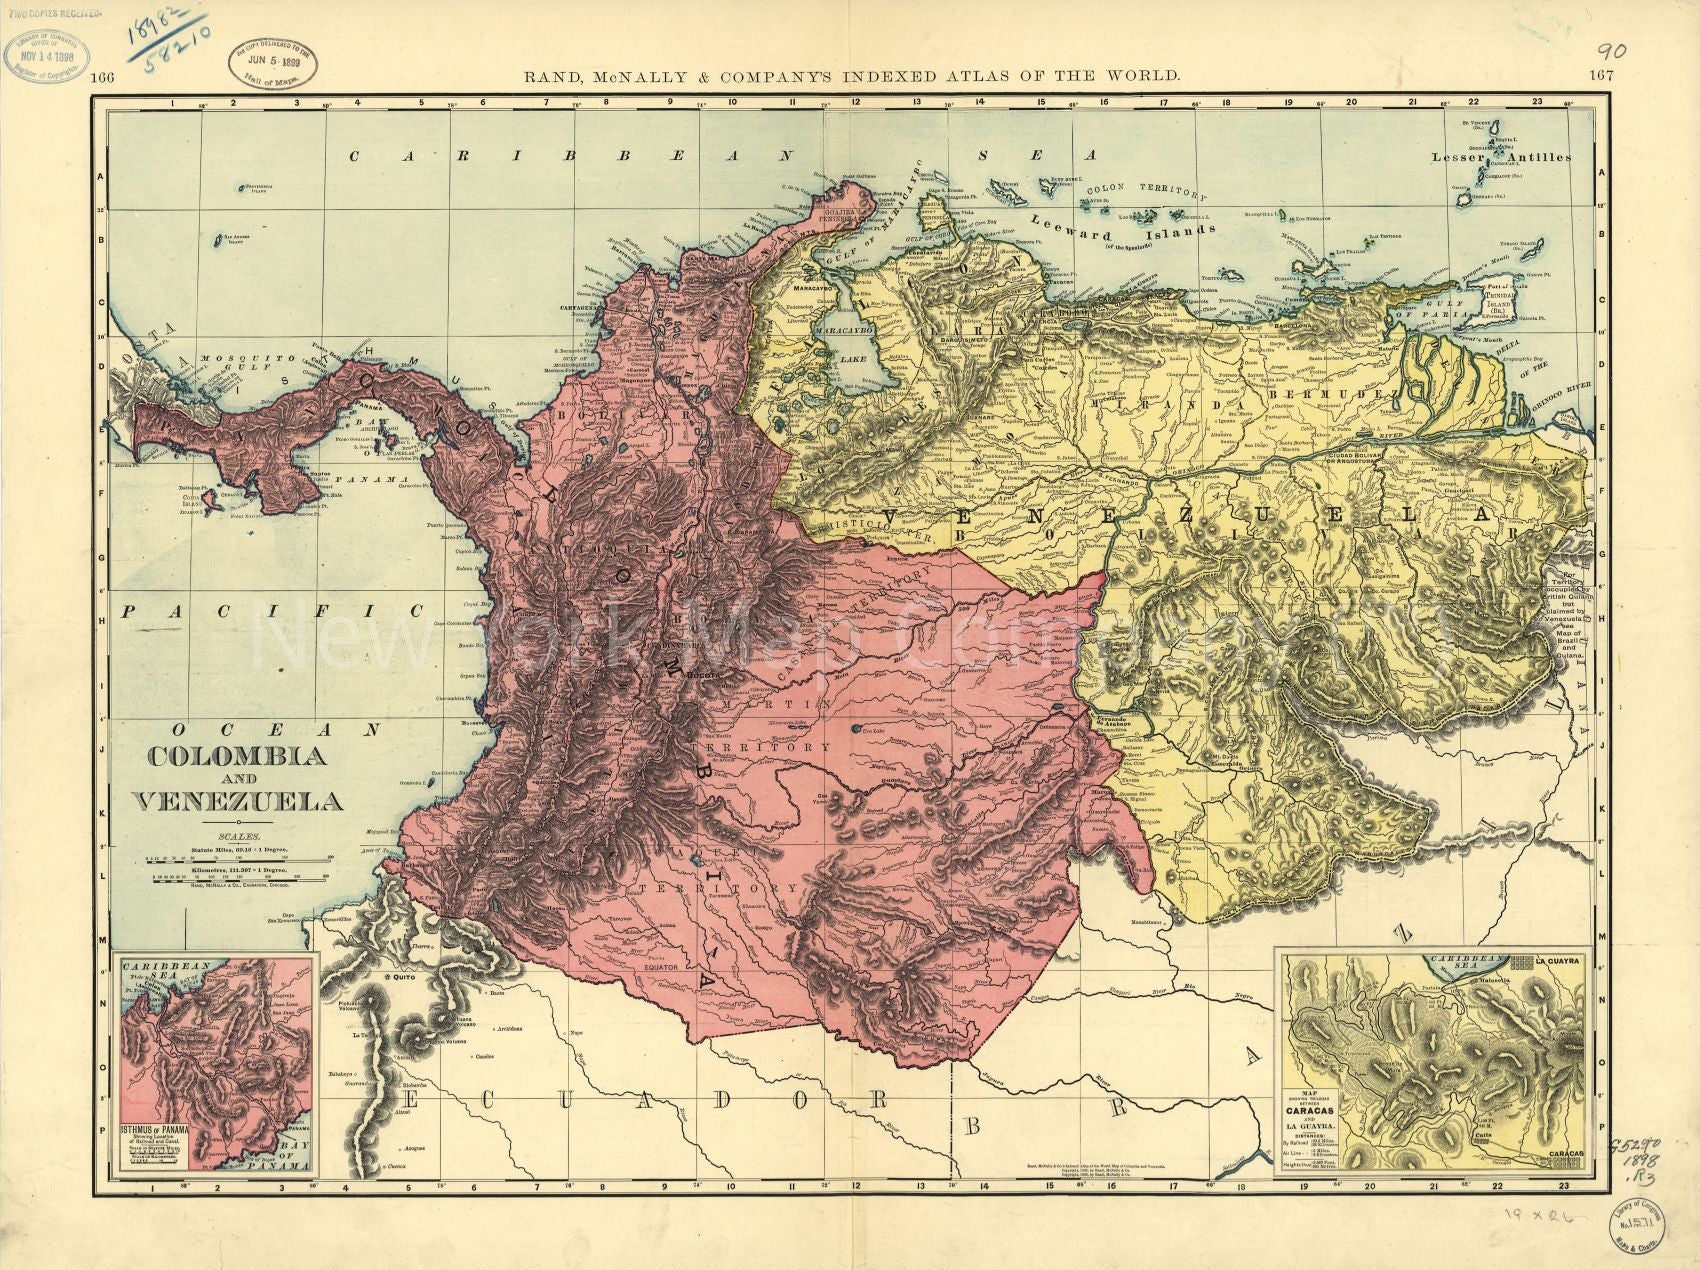 1898 map Colombia and Venezuela. Map Subjects: Colombia | Venezuela